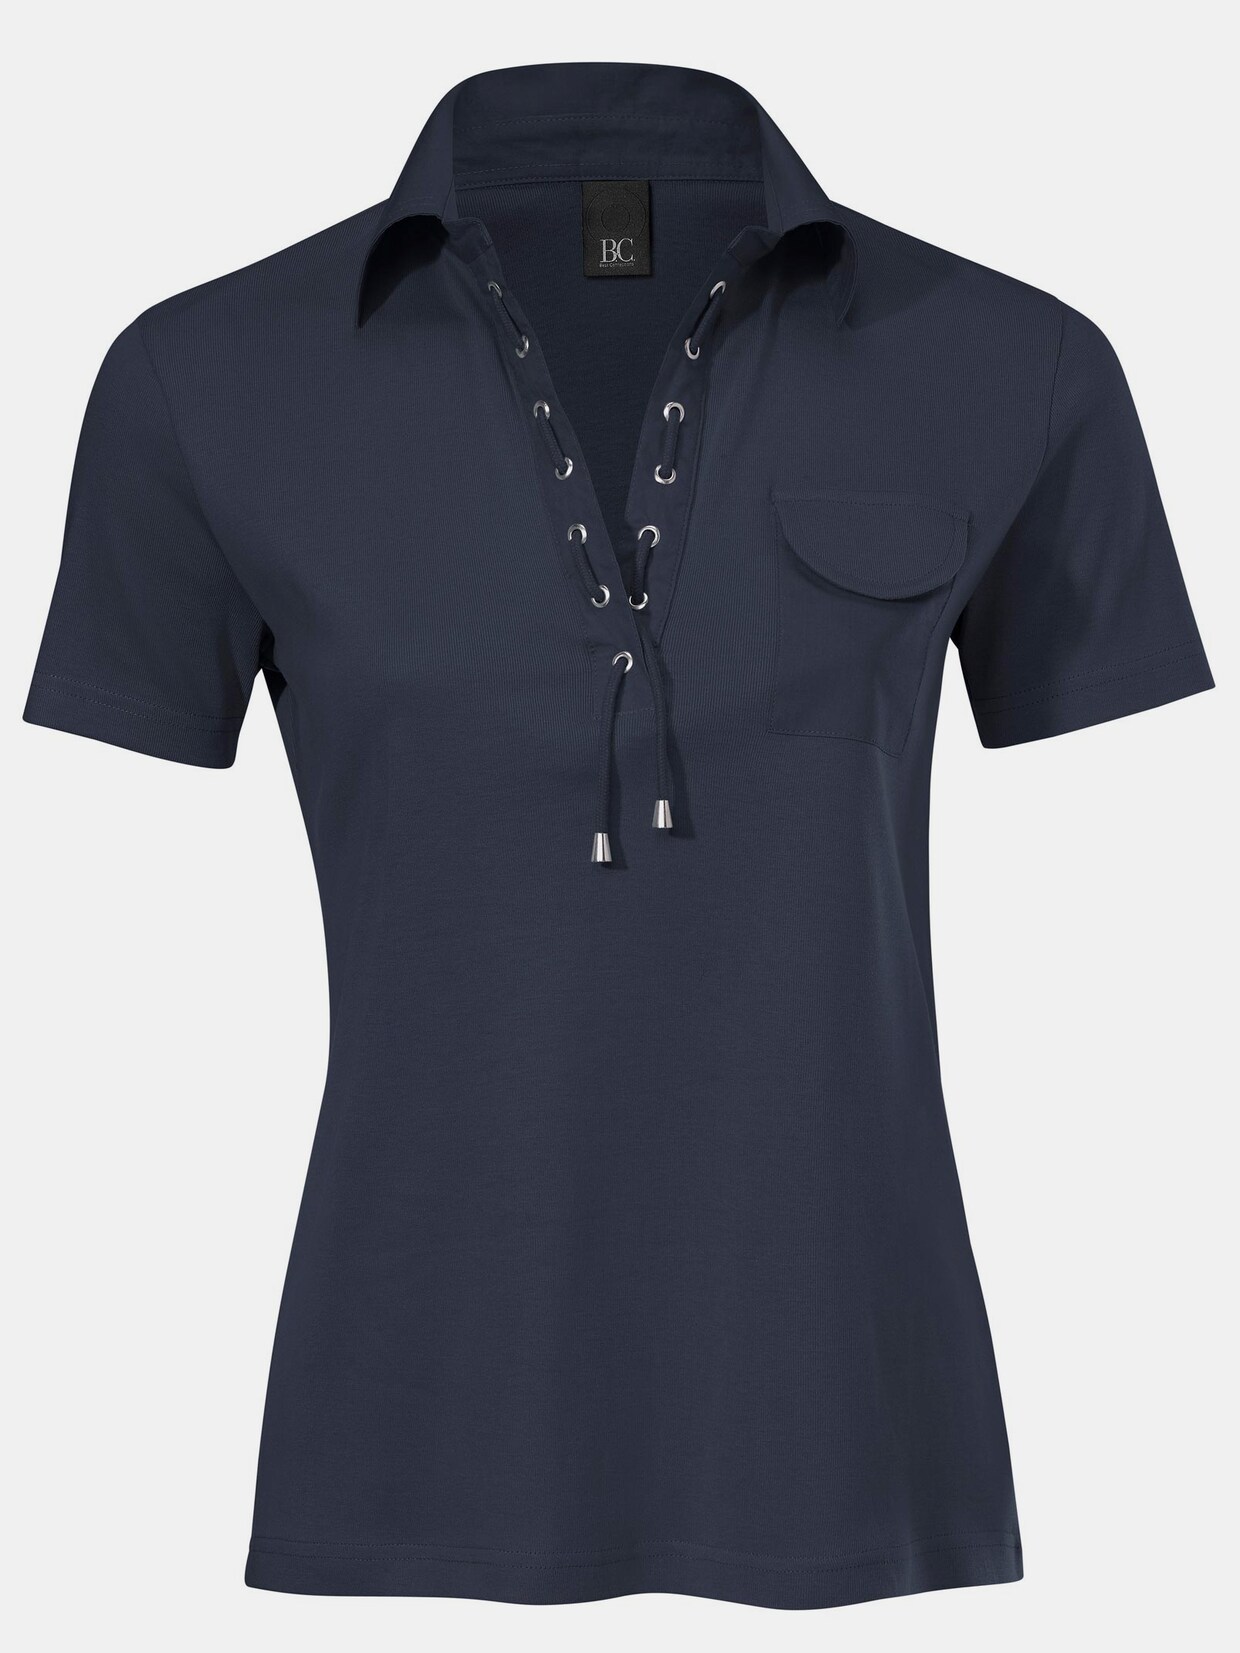 Best Connections Poloshirt - marine